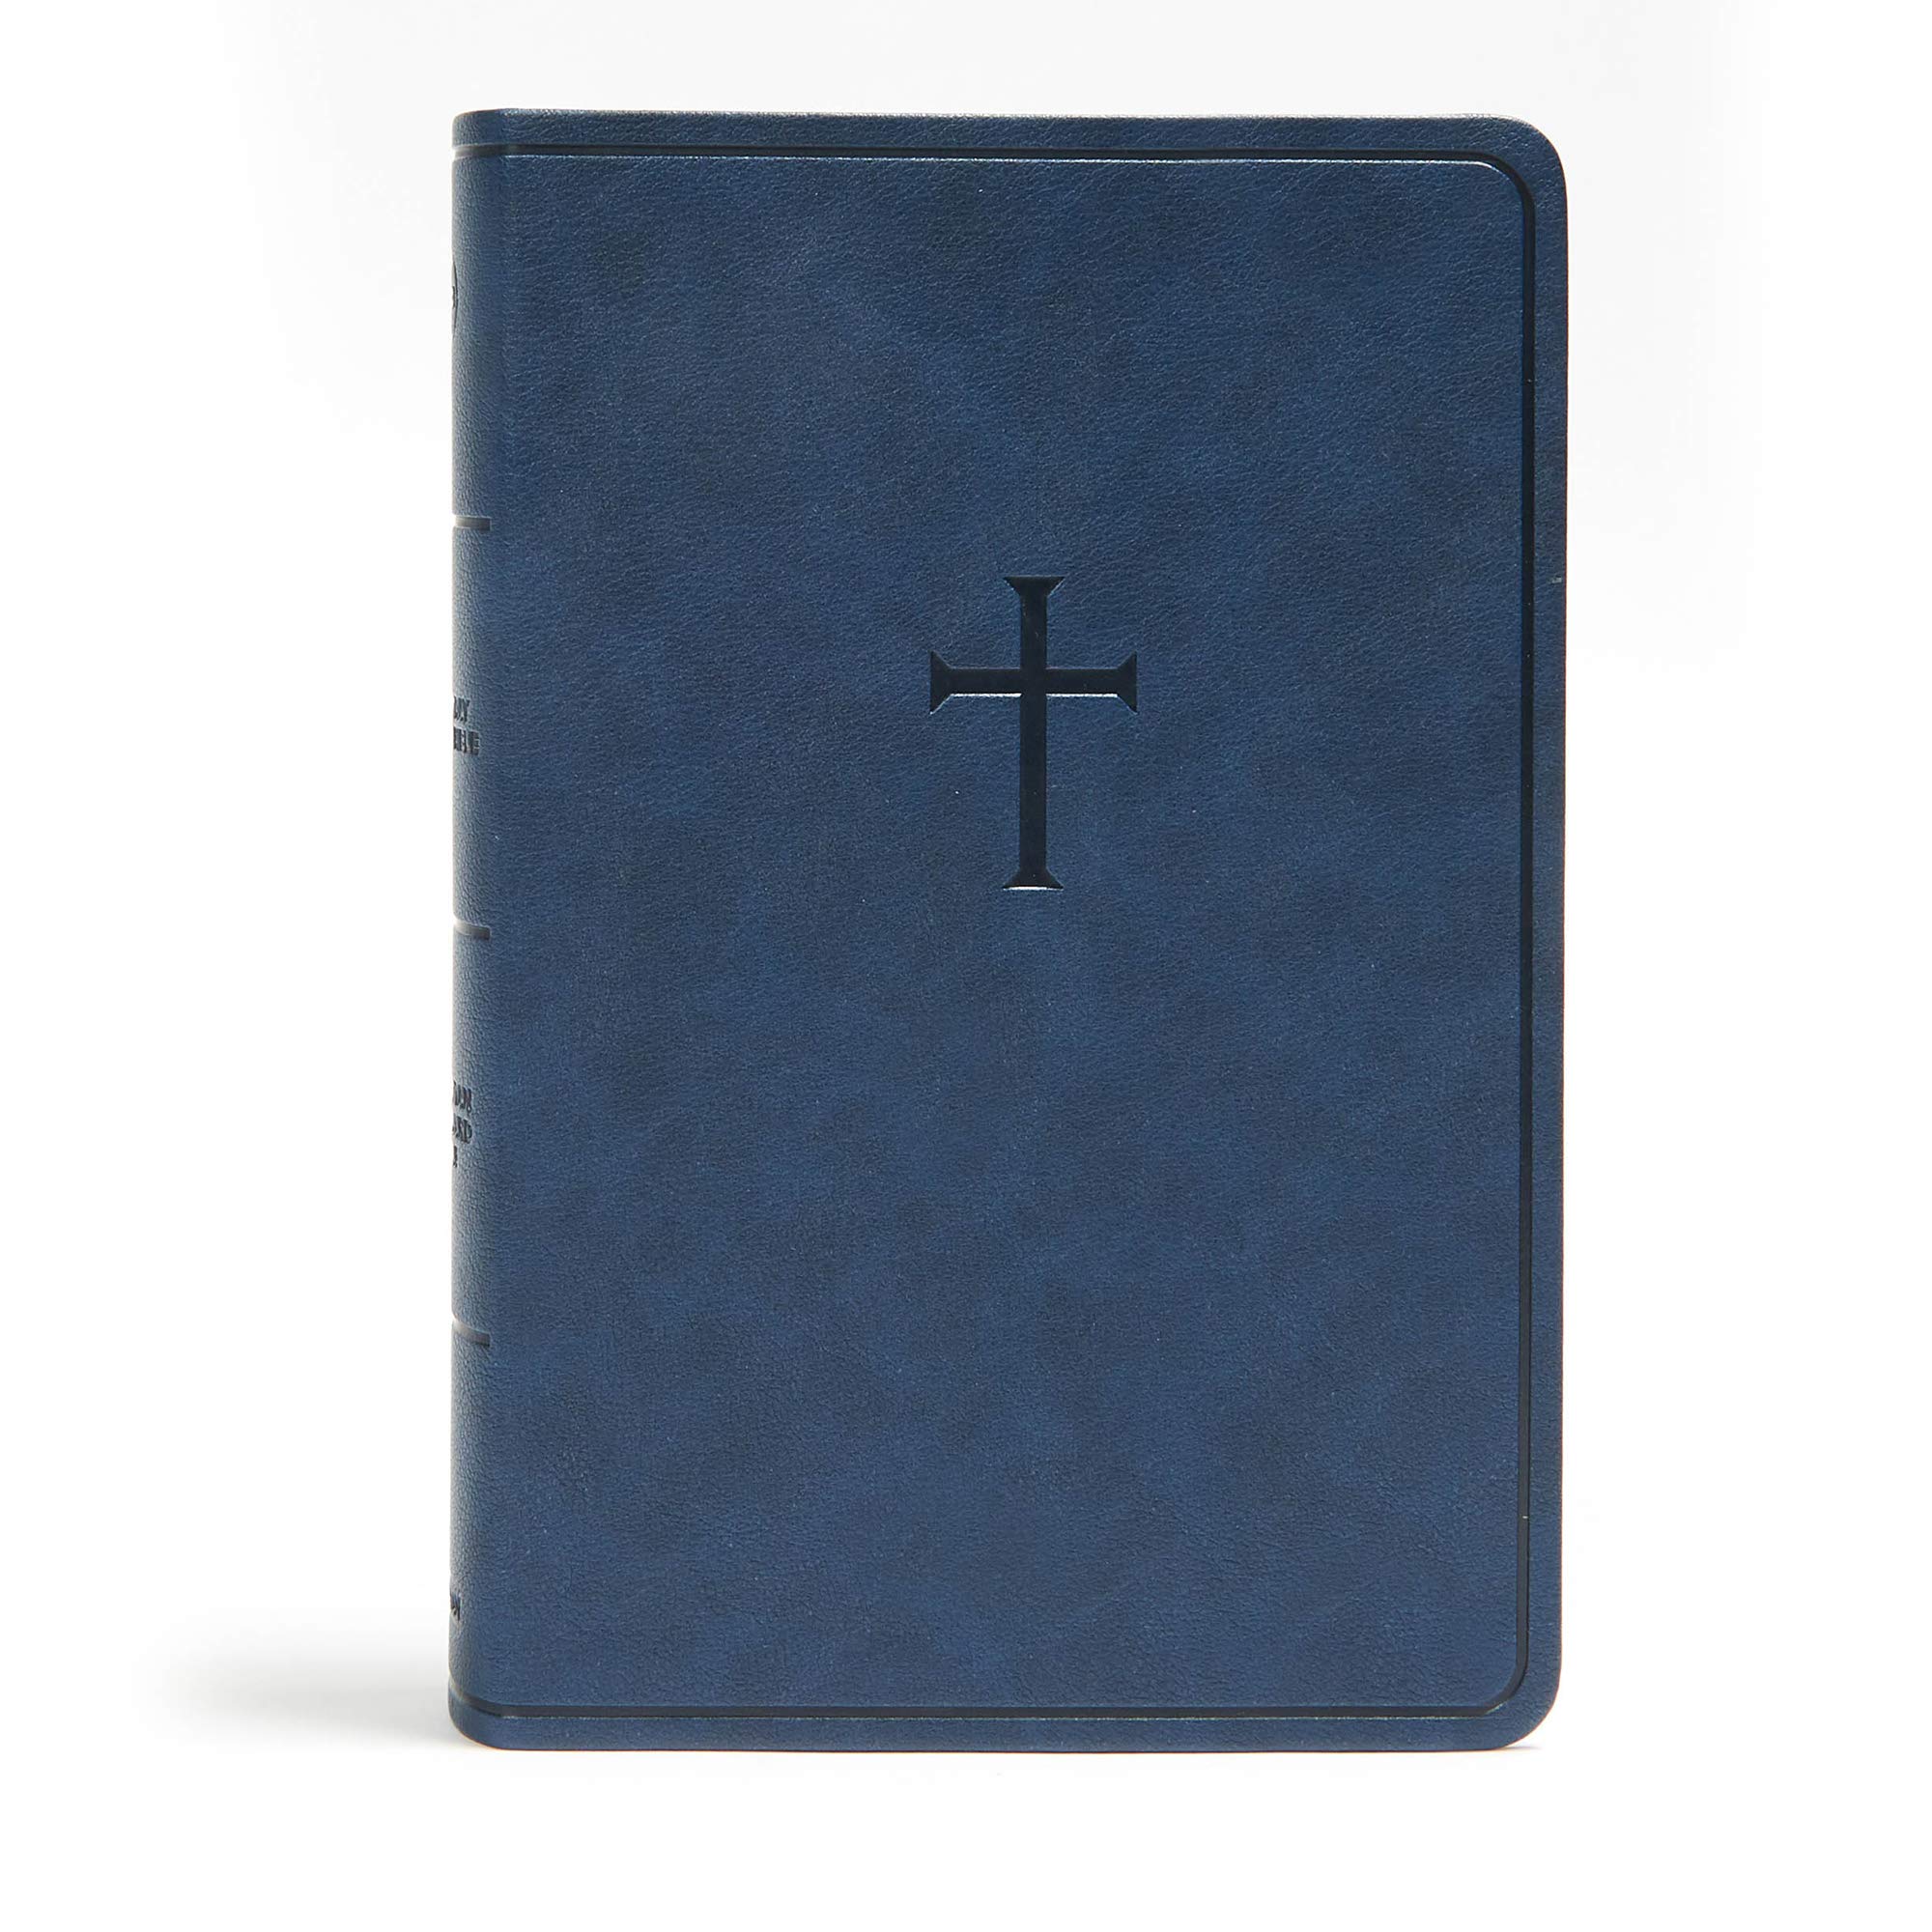 CSB Everyday Study Bible, Navy Cross LeatherTouch, Black Letter, Study Notes, Illustrations, Aricles, Easy-to-Carry, Easy-to-Read Bible Serif Type